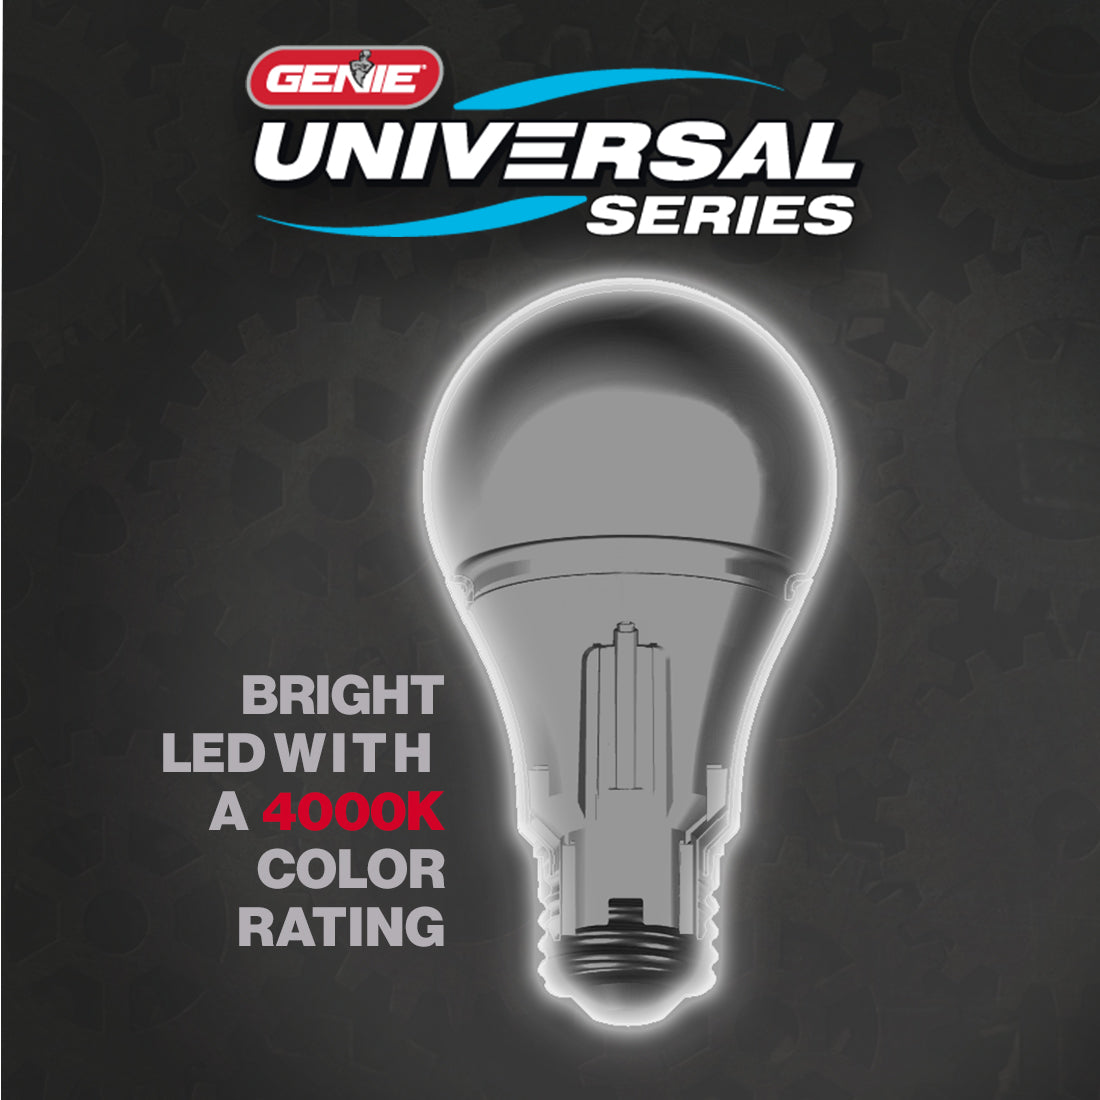 Universal Series LED Light with 4000K Color Rating